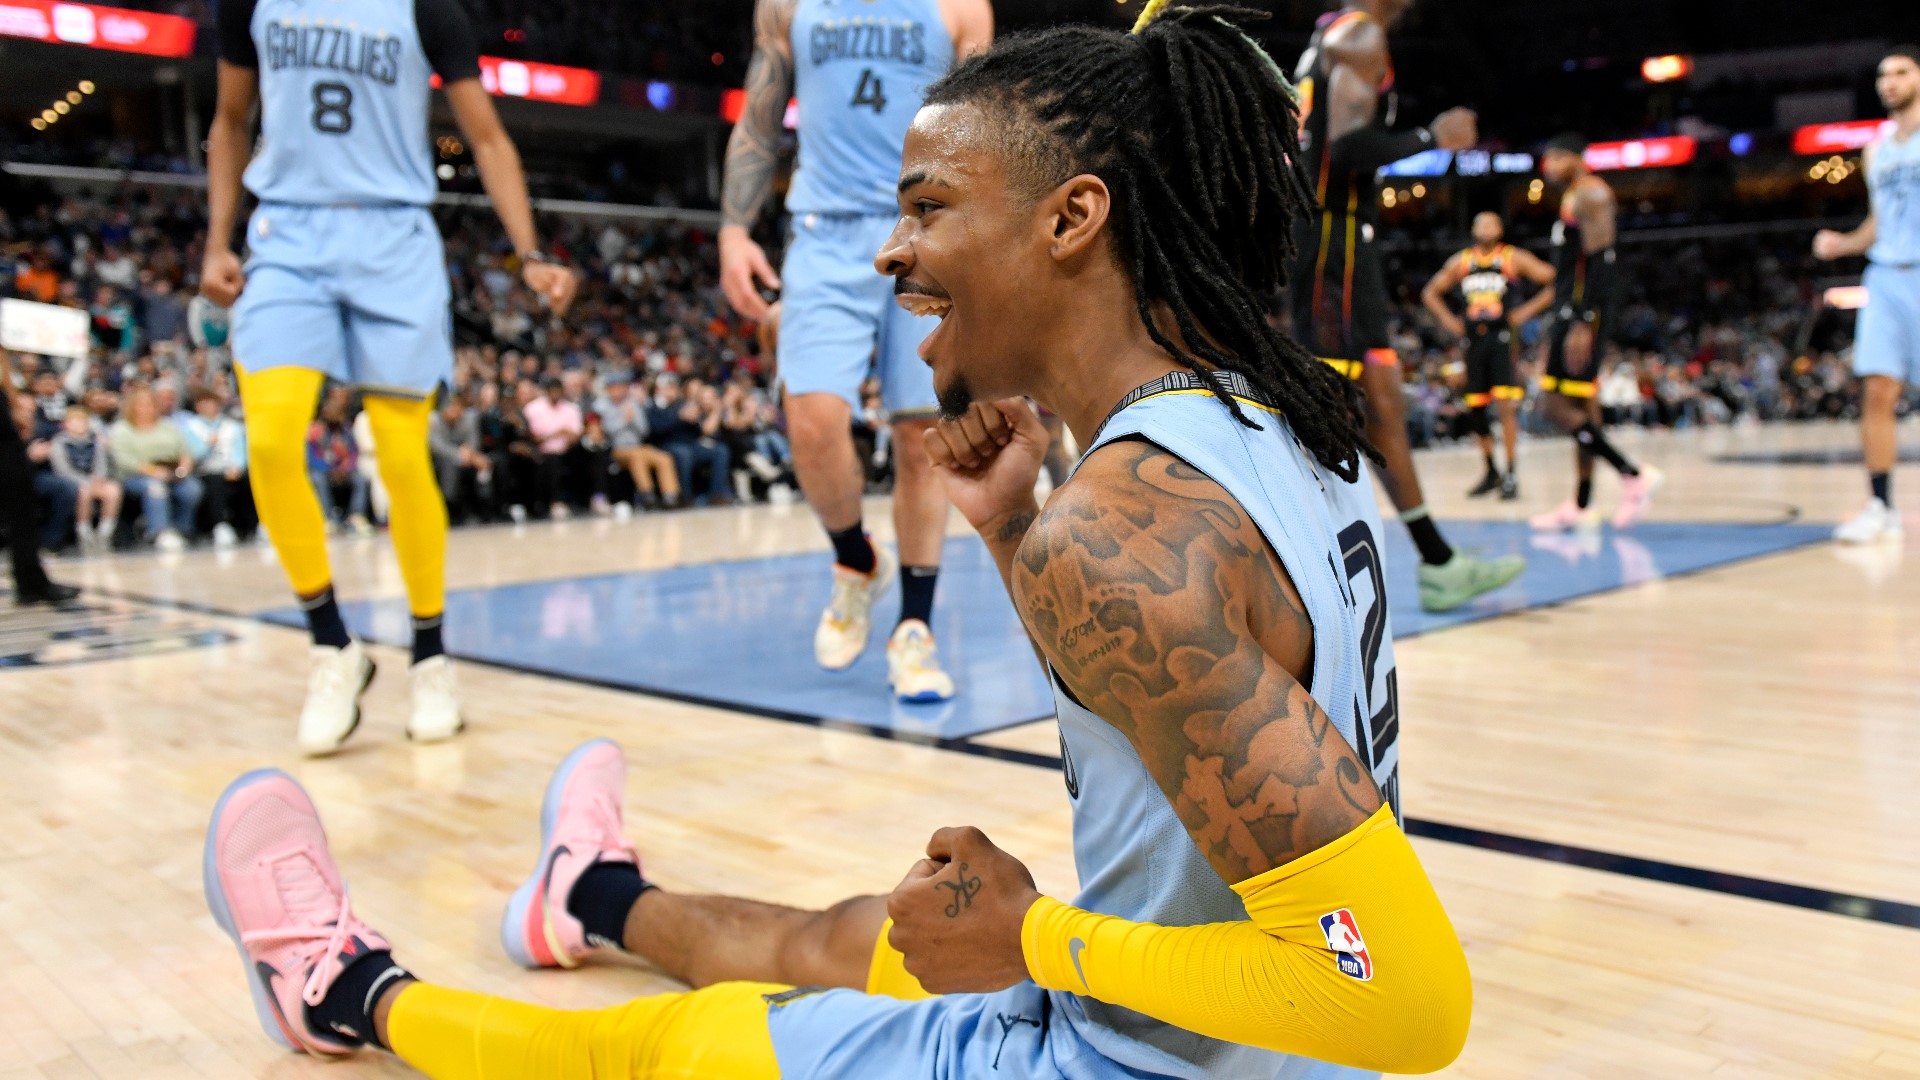 Though Otis Sanford says the NBA made the right call in suspending Ja Morant, he agrees that "we all need to take a step back and look at what we were like at 23."